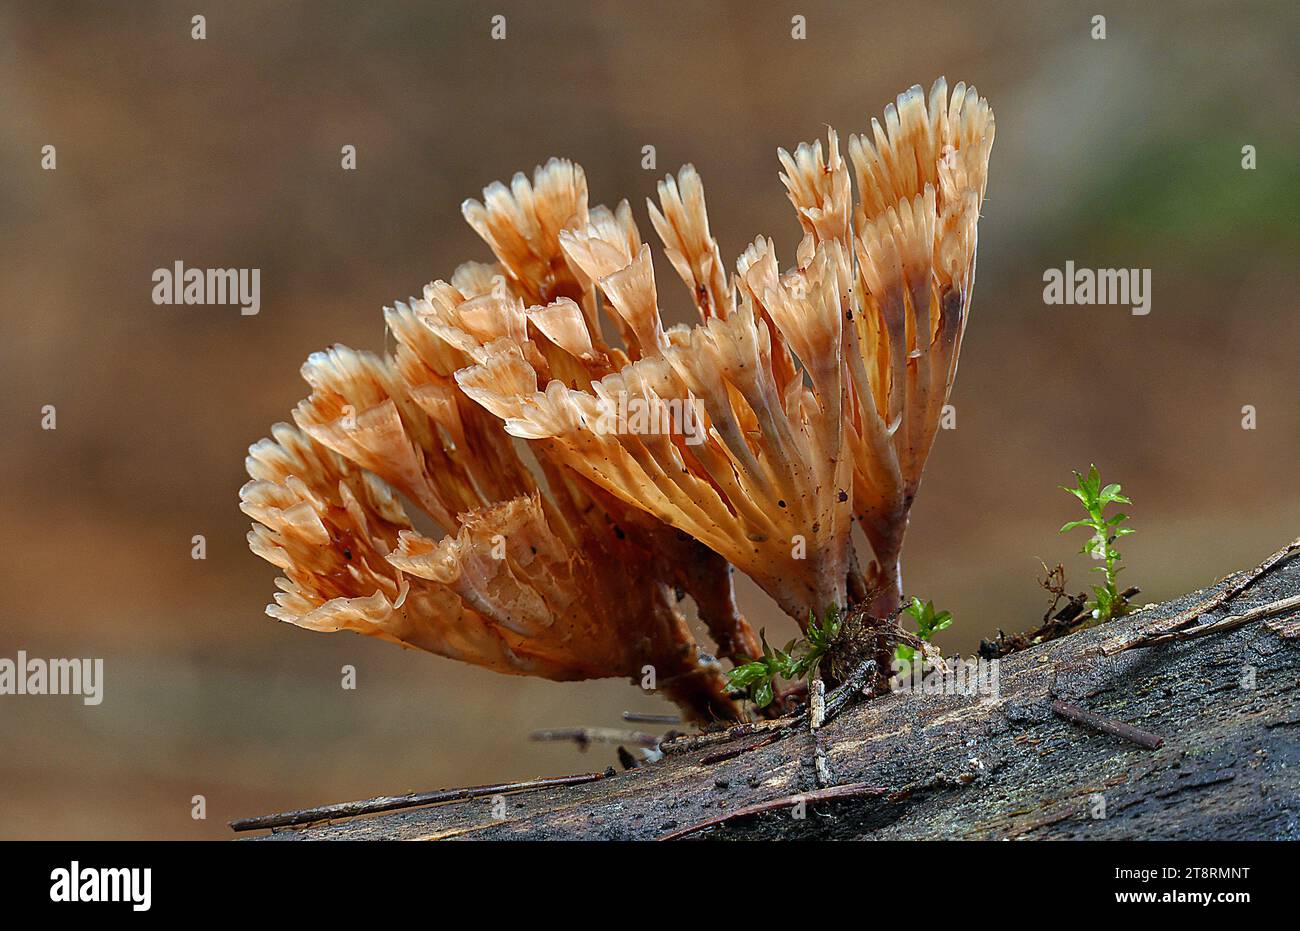 Wine Glass Fungus (Podoscypha petalodes), Podoscypha petalodes is a widely distributed species of fungus in the family Meruliaceae. The fungus produces a rosette-like fruit bodies with a shape suggestive of its common names wine glass fungus, and ruffled paper fungus Stock Photo